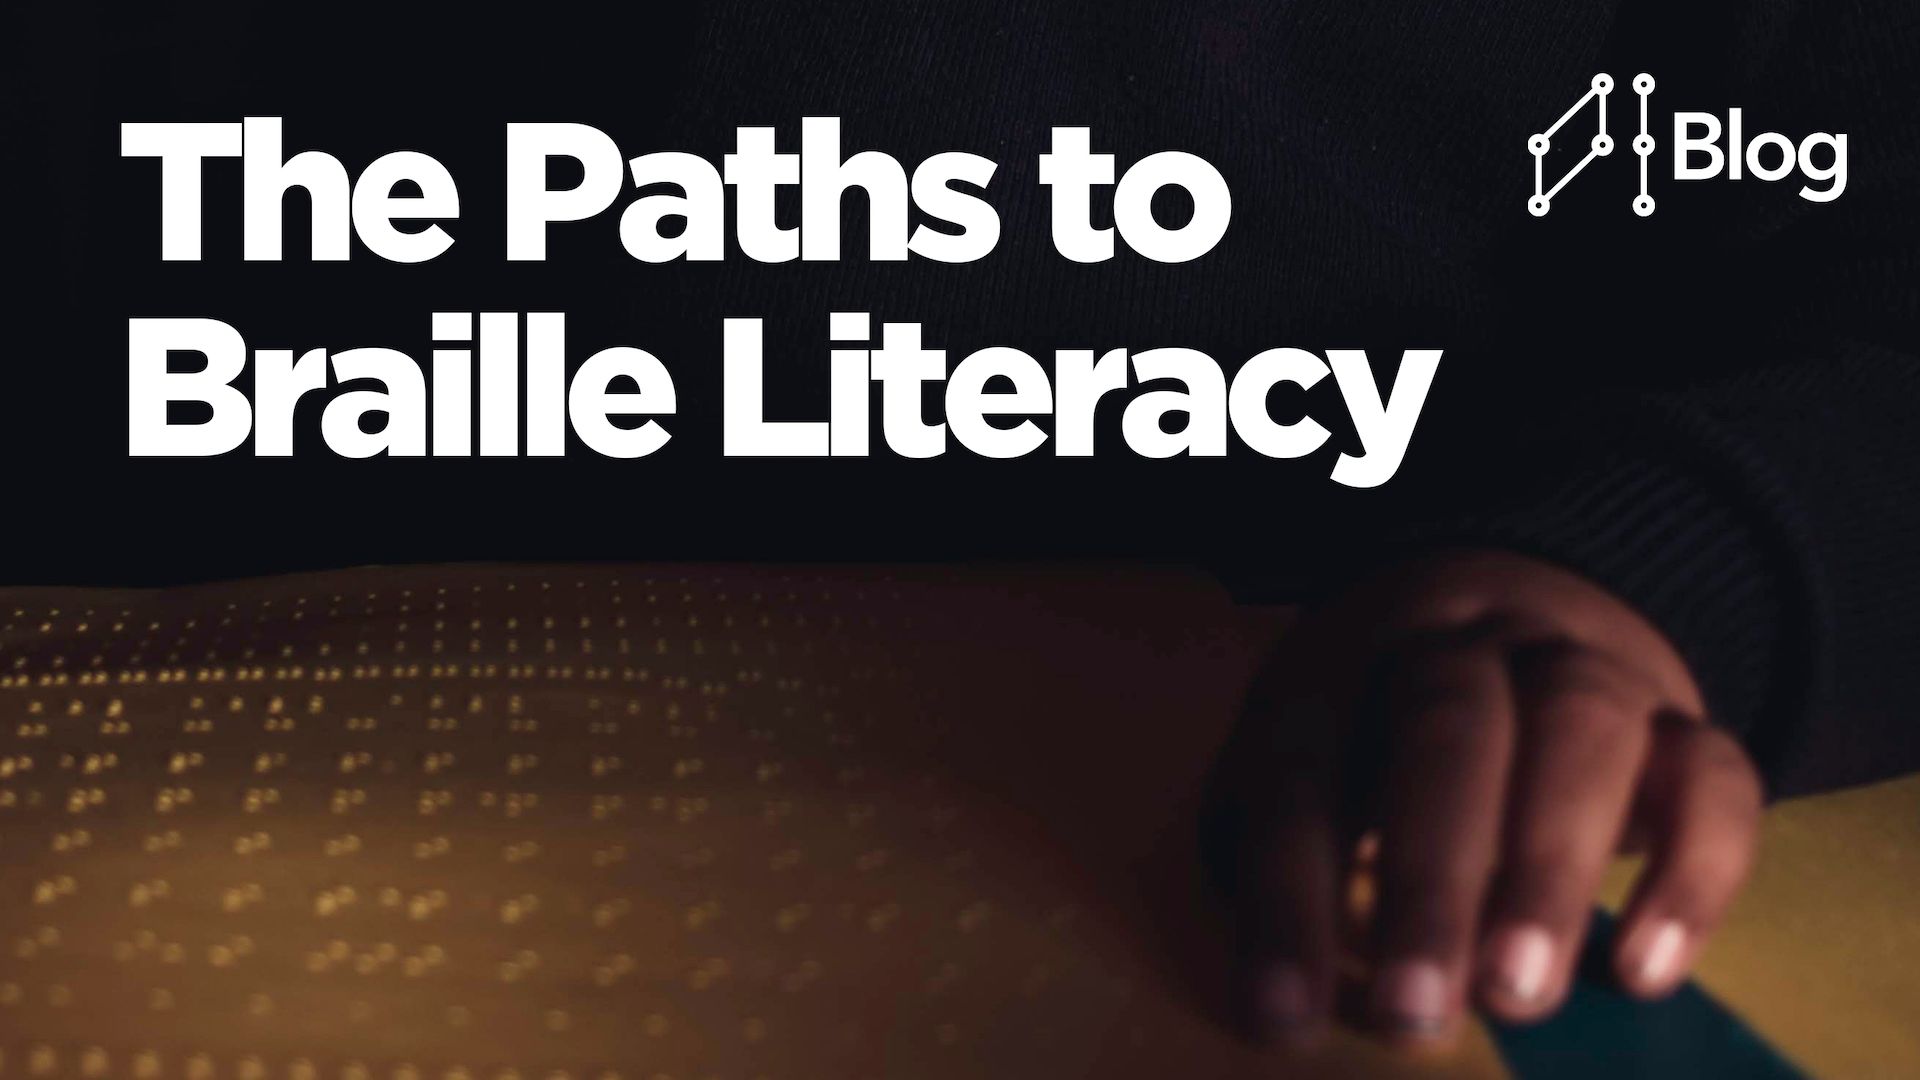 The Paths to Braille Literacy